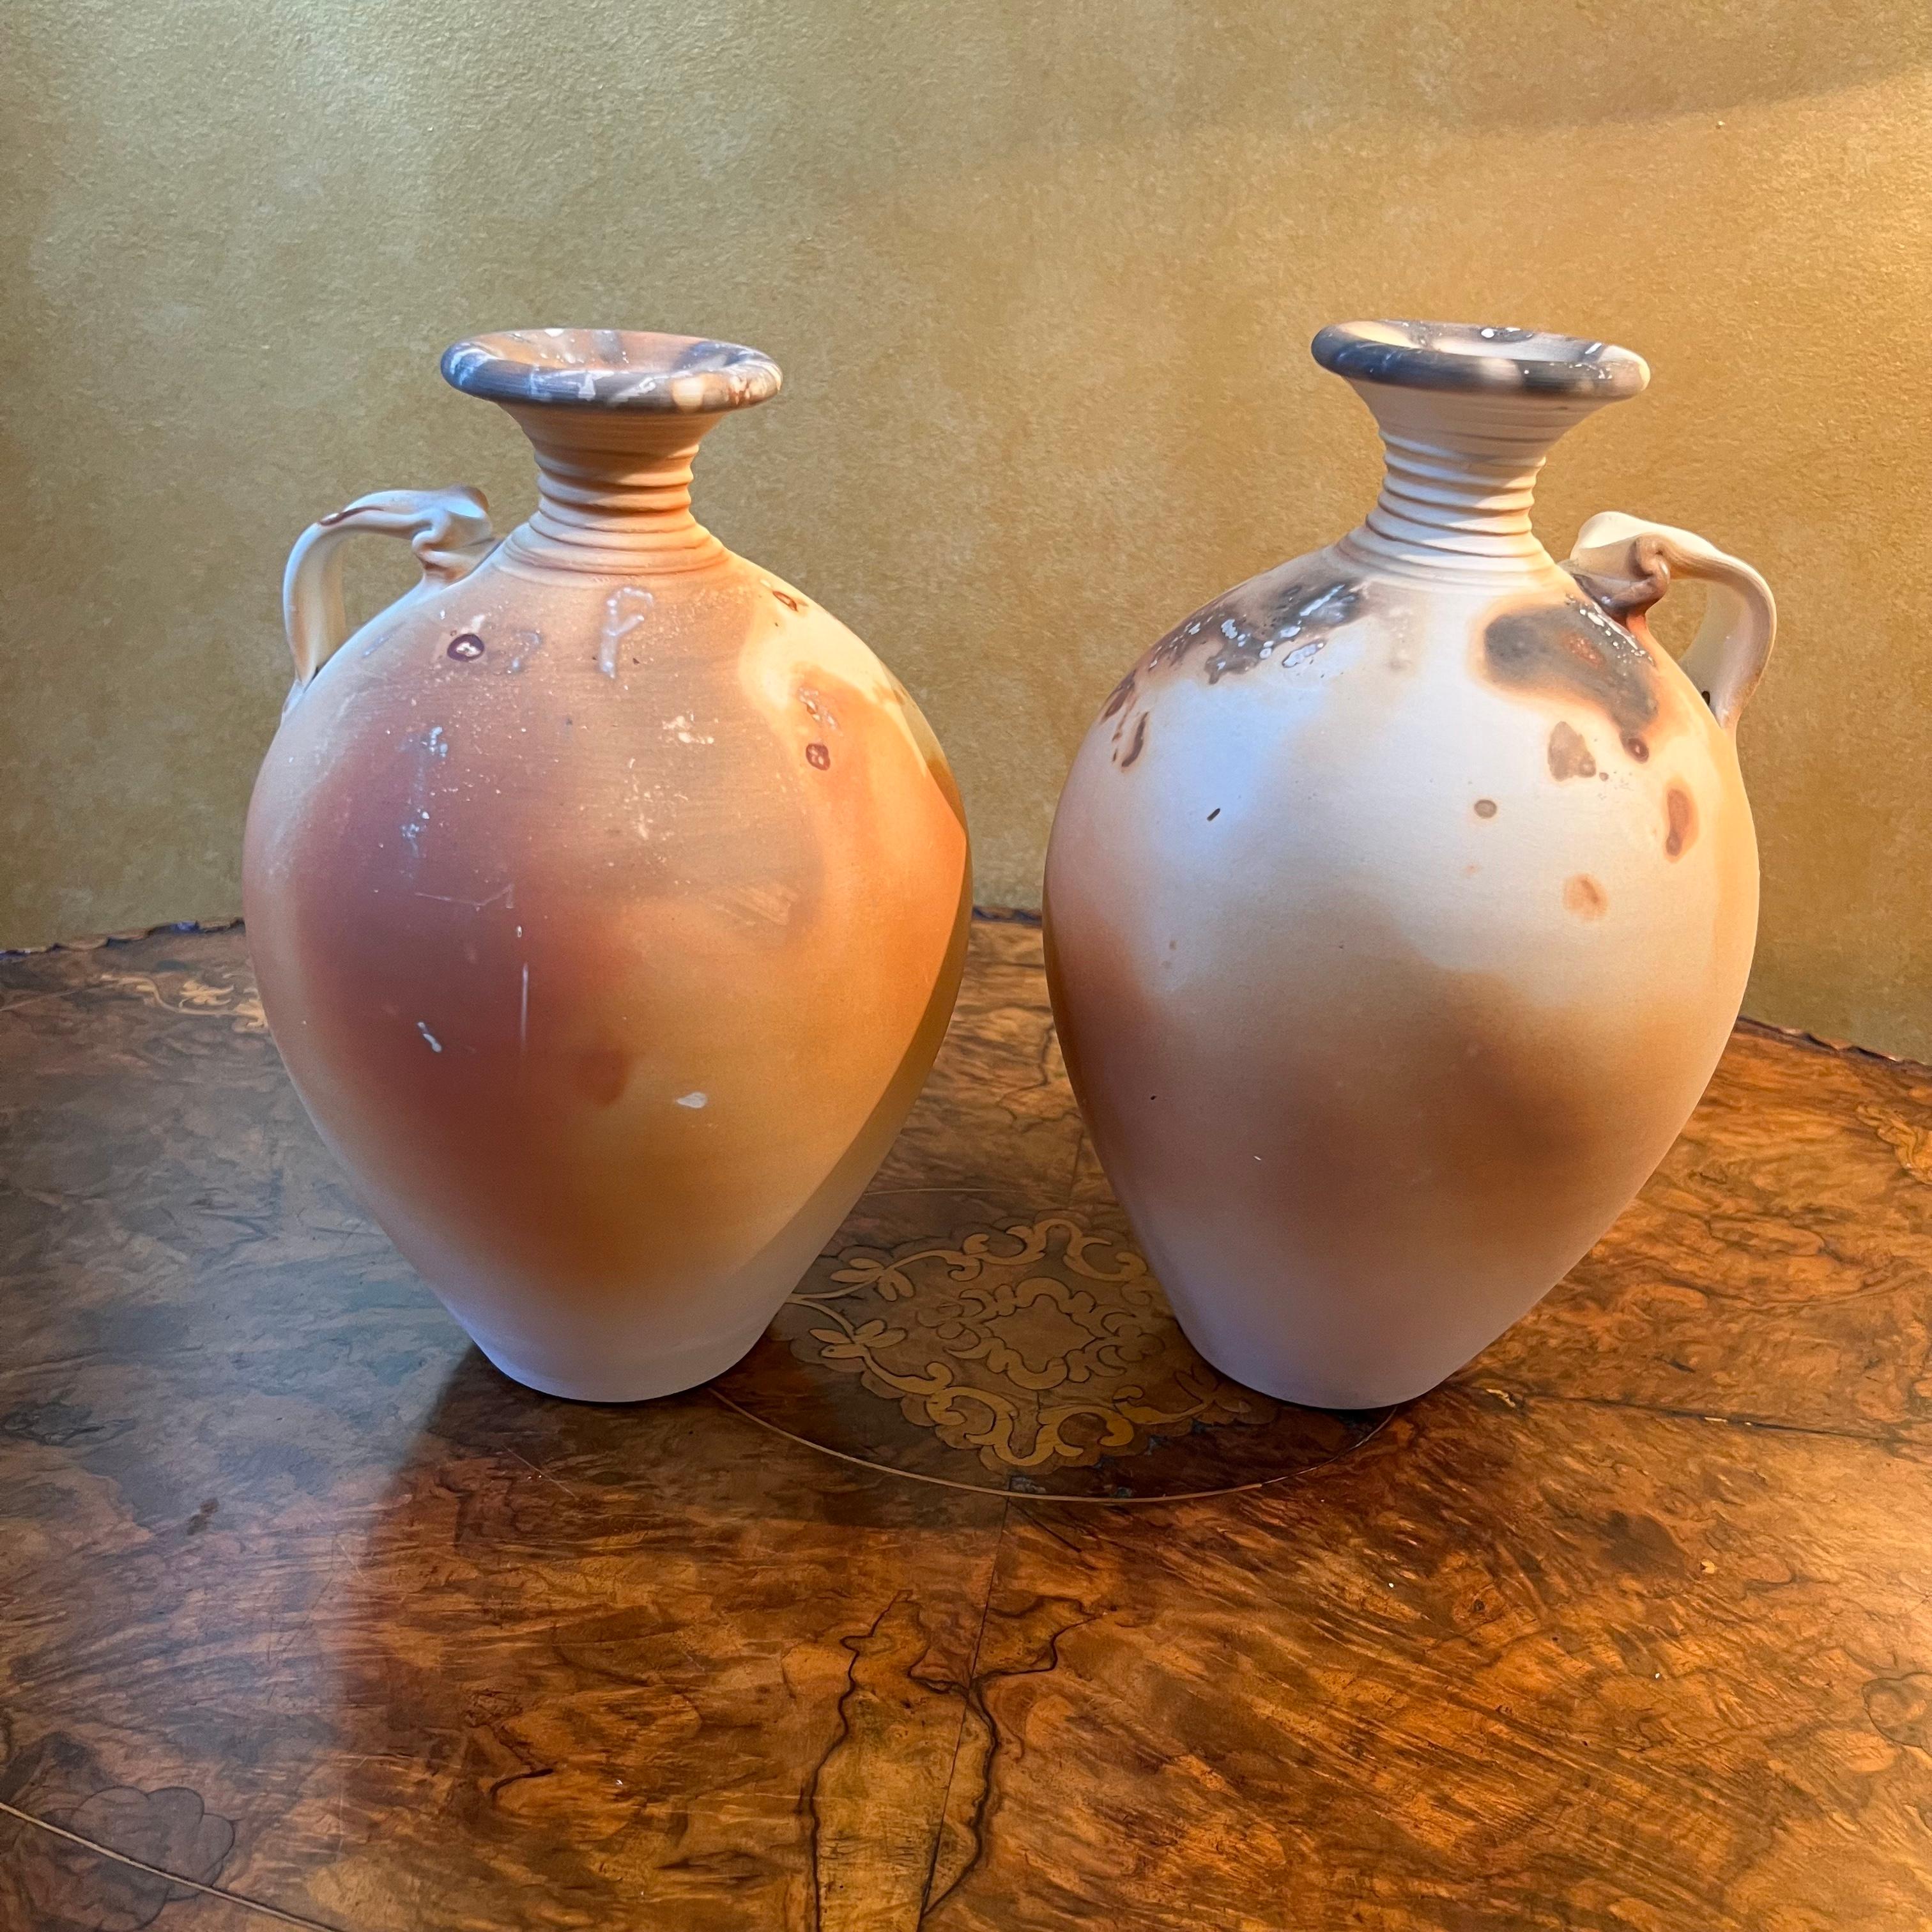 Decorative vases only water can no be stored in these. Sticker on base Made By Rod Pedler in South Australia 

Circa: 1980s

Material: Pottery 

Country Of Origin: Australia   

Measurements: 24cm high, 13cm diameter (middle)

Postage via Australia